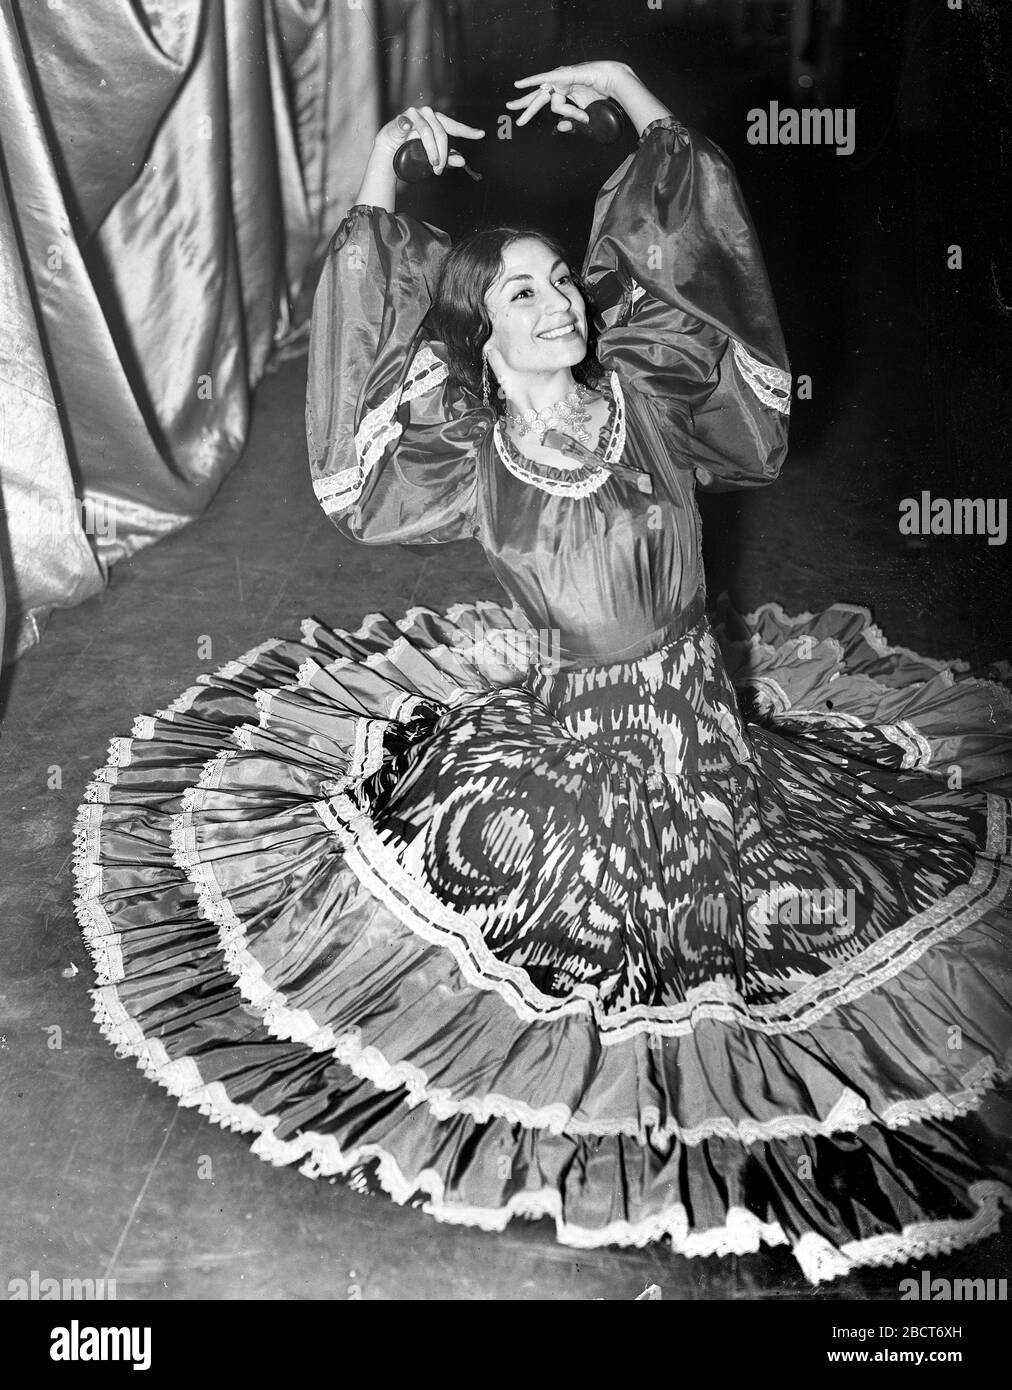 Actress Gianna Maria Canale in flamenco dress London, October 17th 1957 Stock Photo